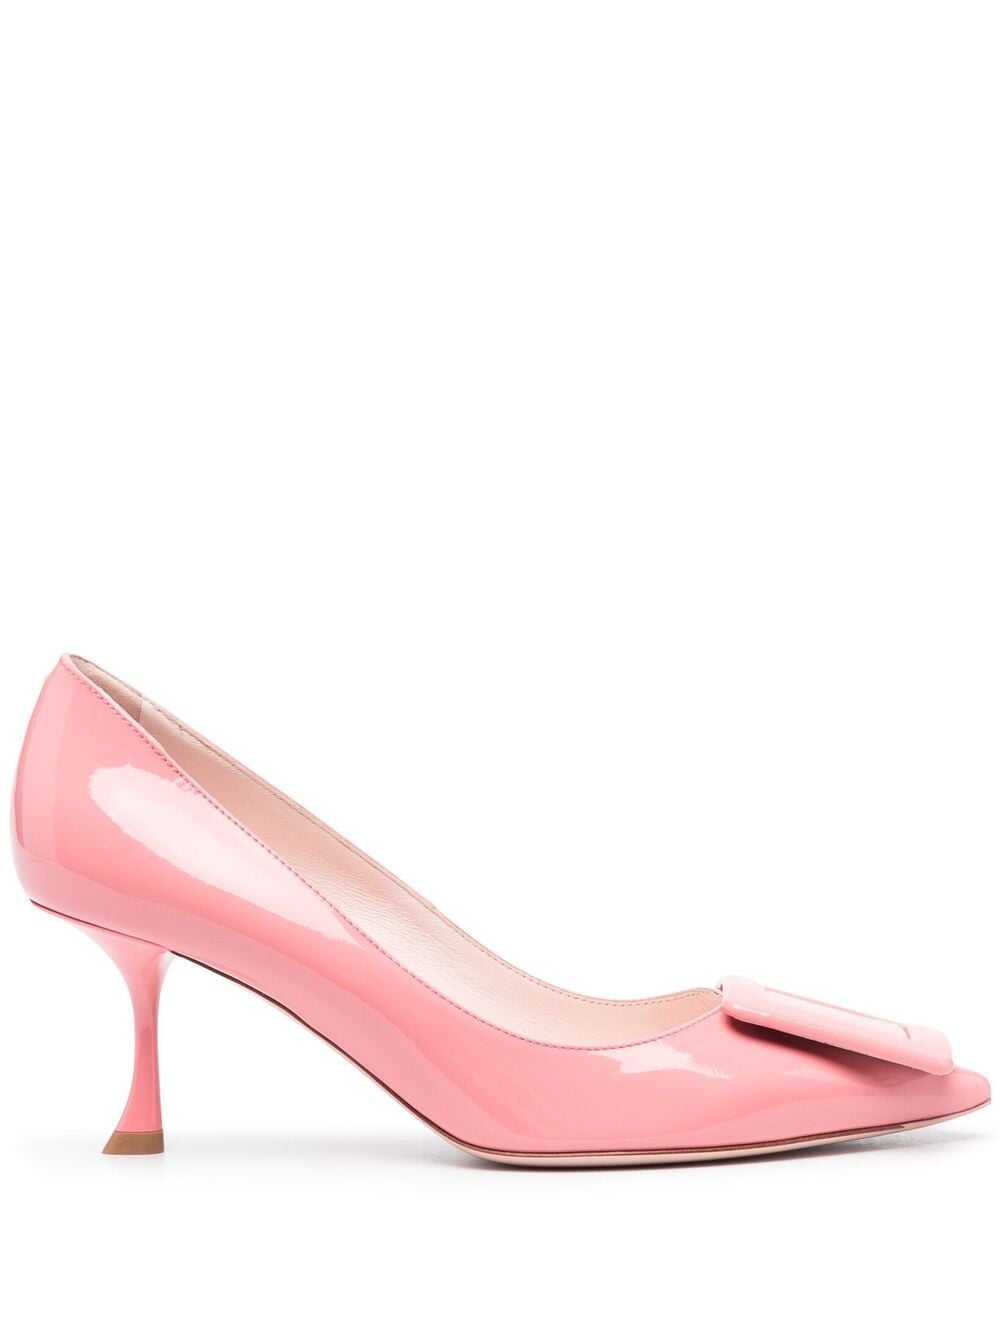 Viv’ In The City Leather Pumps дамски обувки Roger Vivier 846841541_36